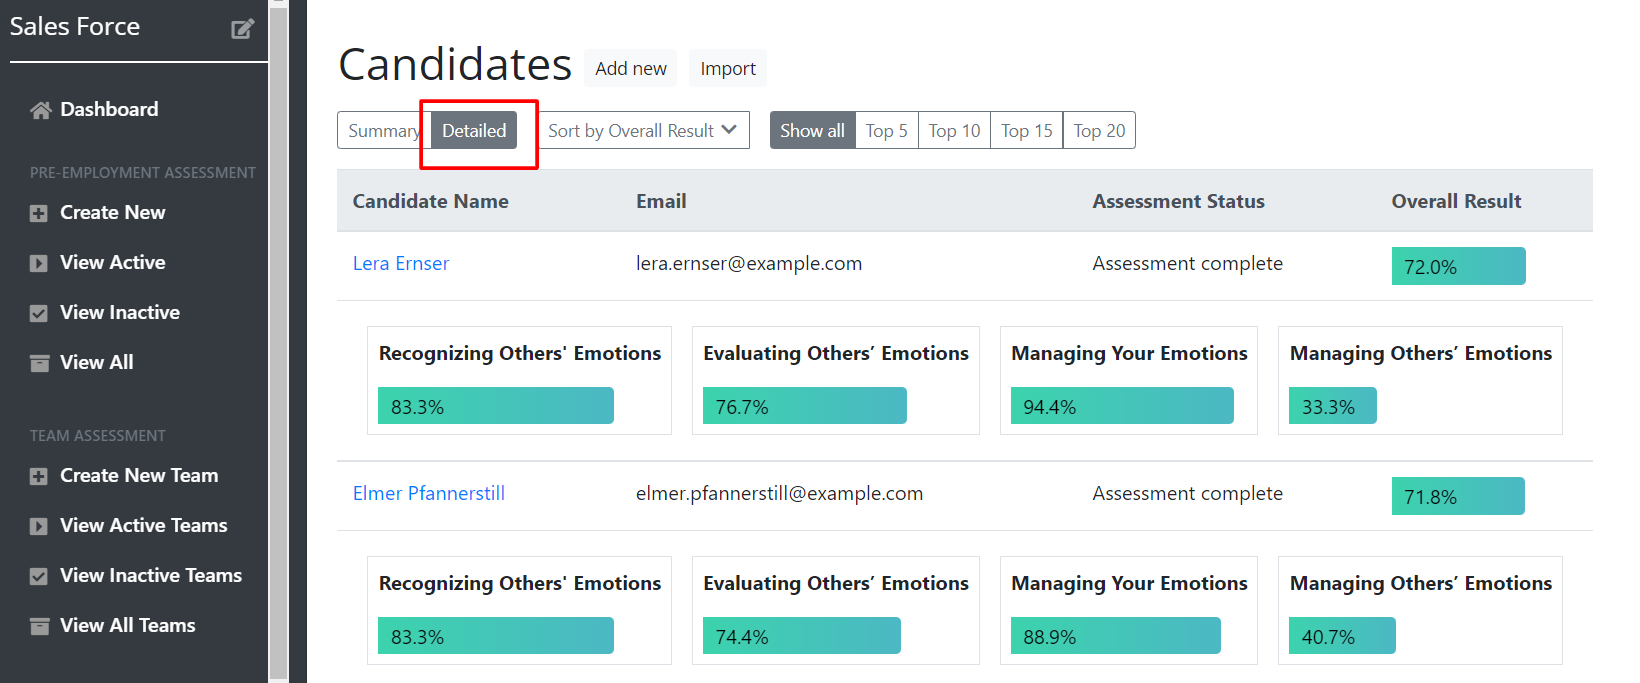 emotional intelligence assessment for project managers eqmatch